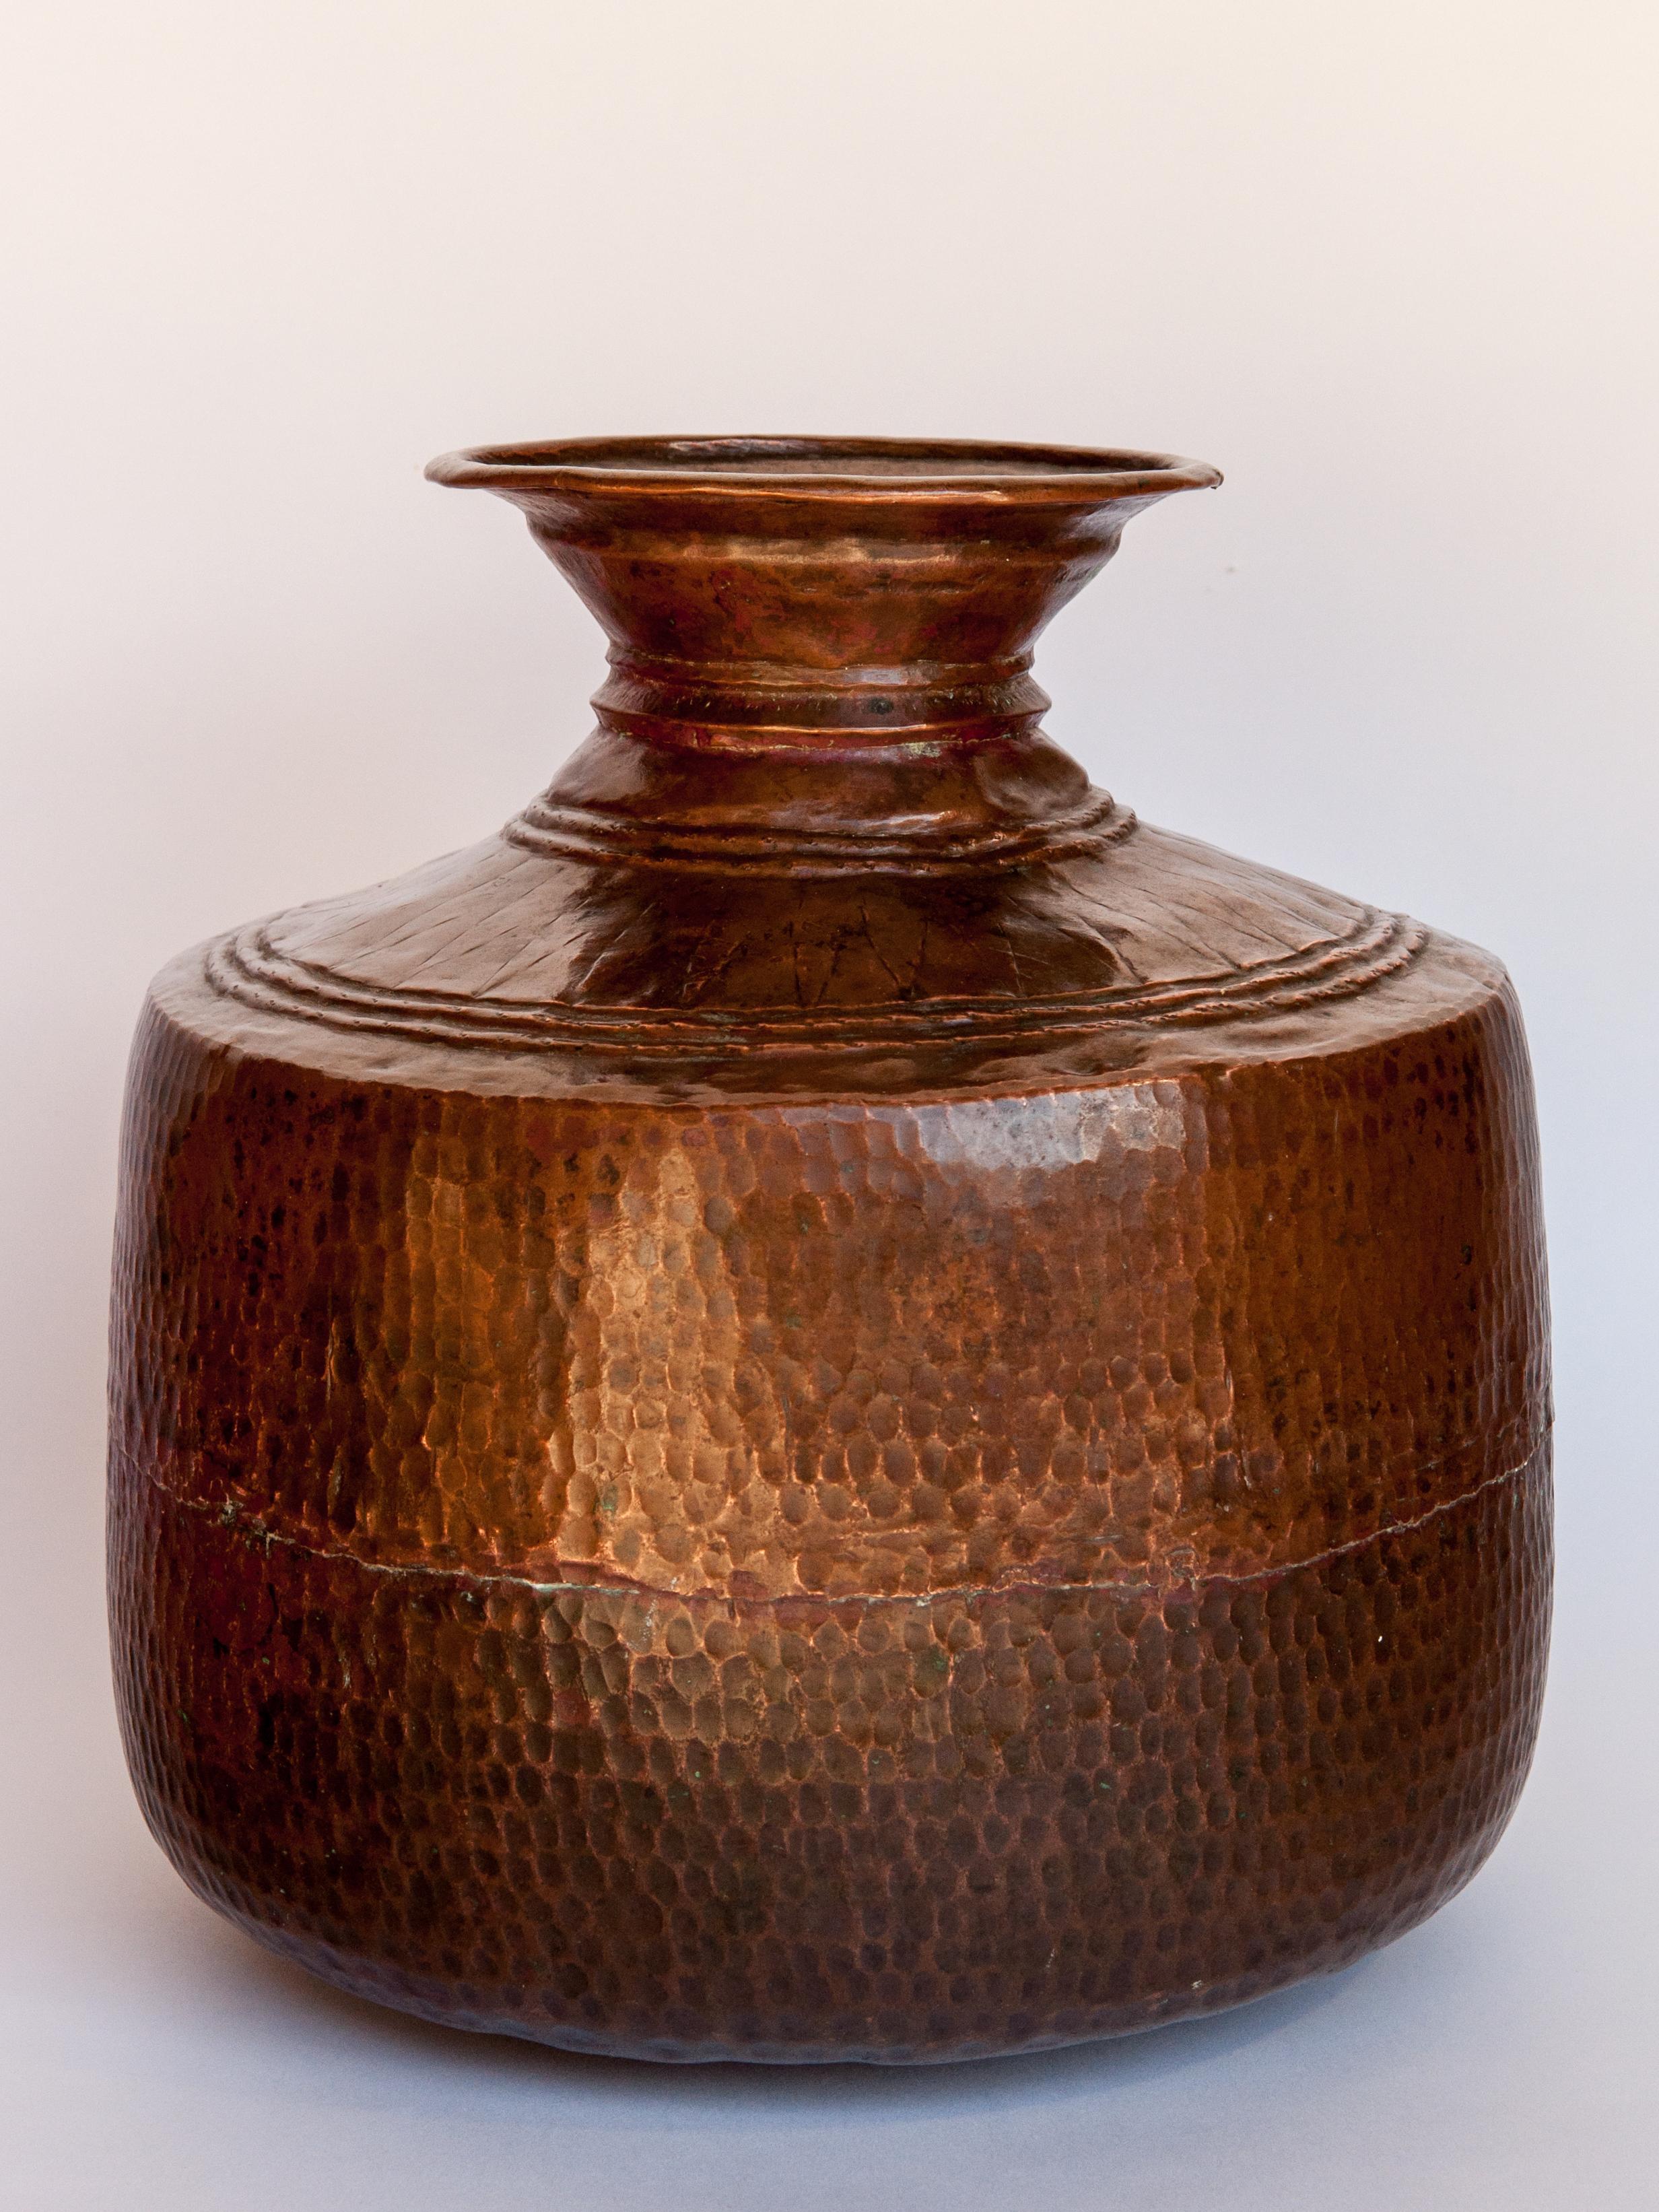 Nepalese Vintage Copper Water Pot, Hand Hammered, from Nepal, Mid-20th Century